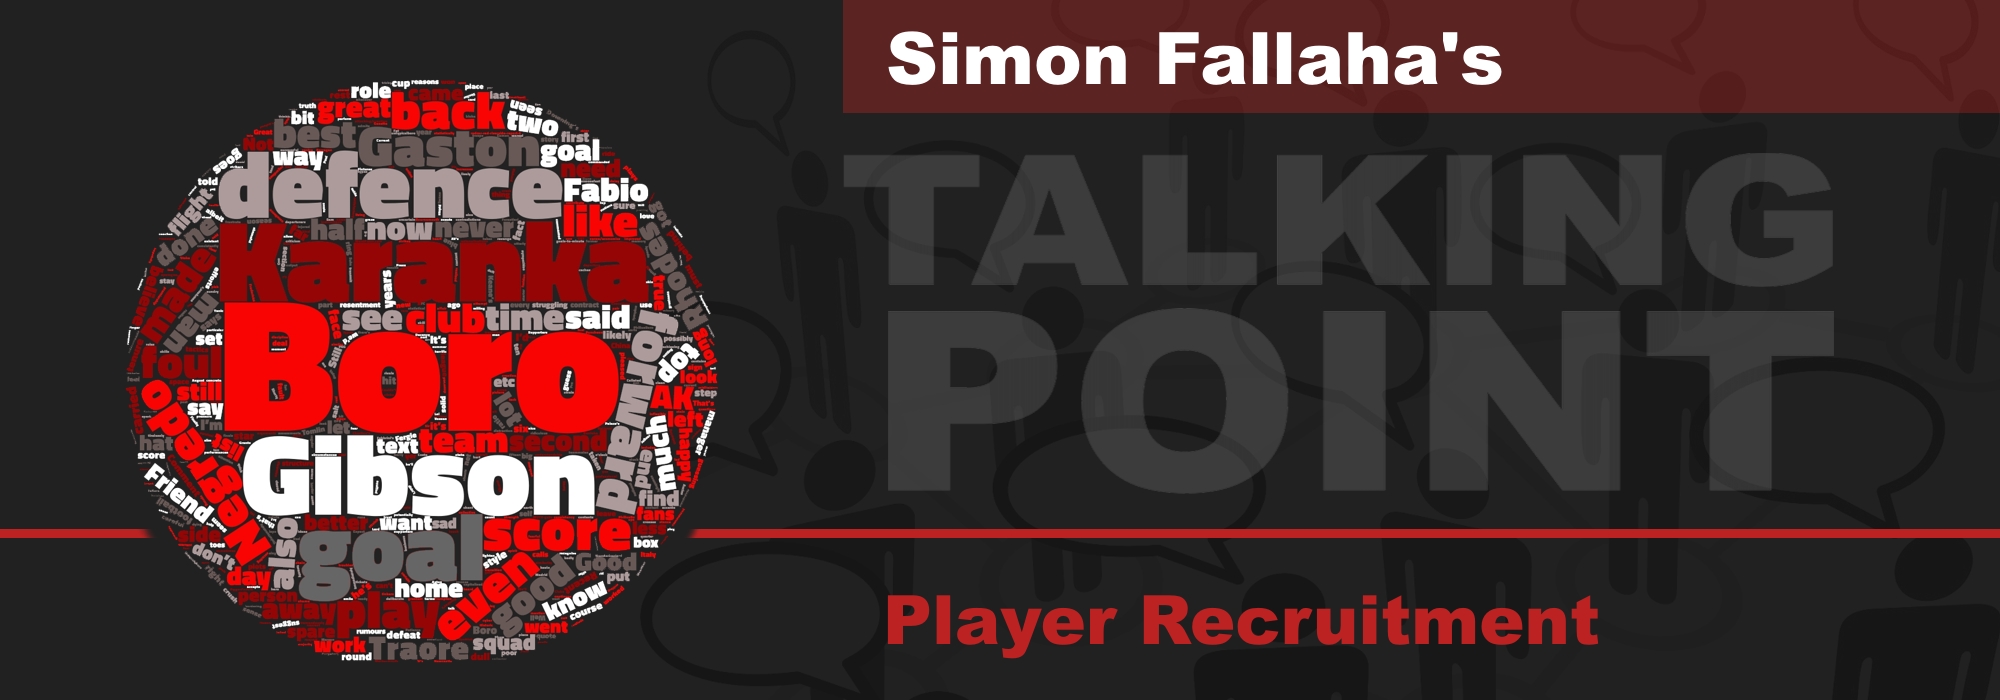 Talking Point - Player Recruitment